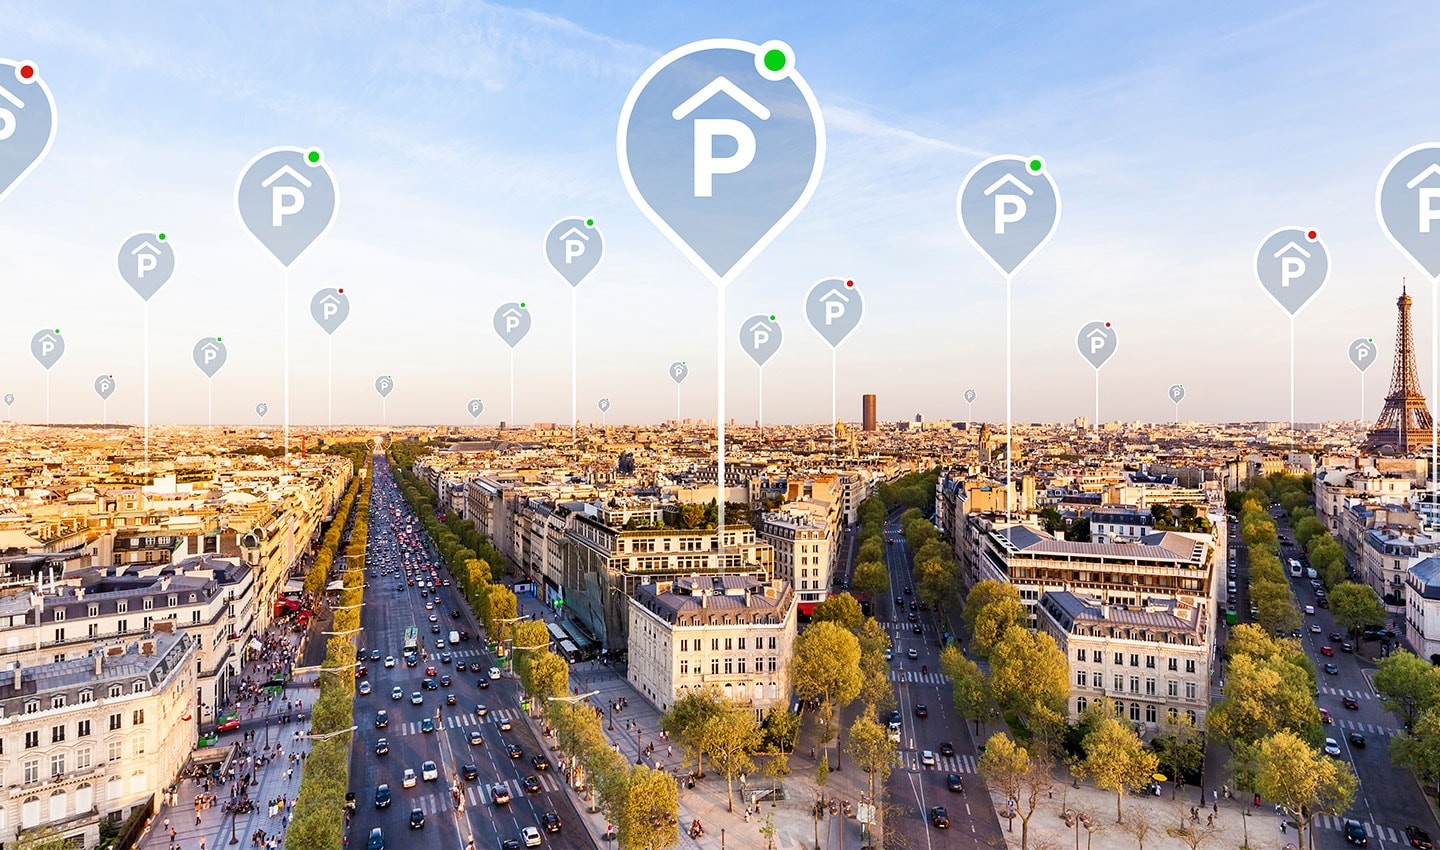 future-of-mobility-is-connected-parking